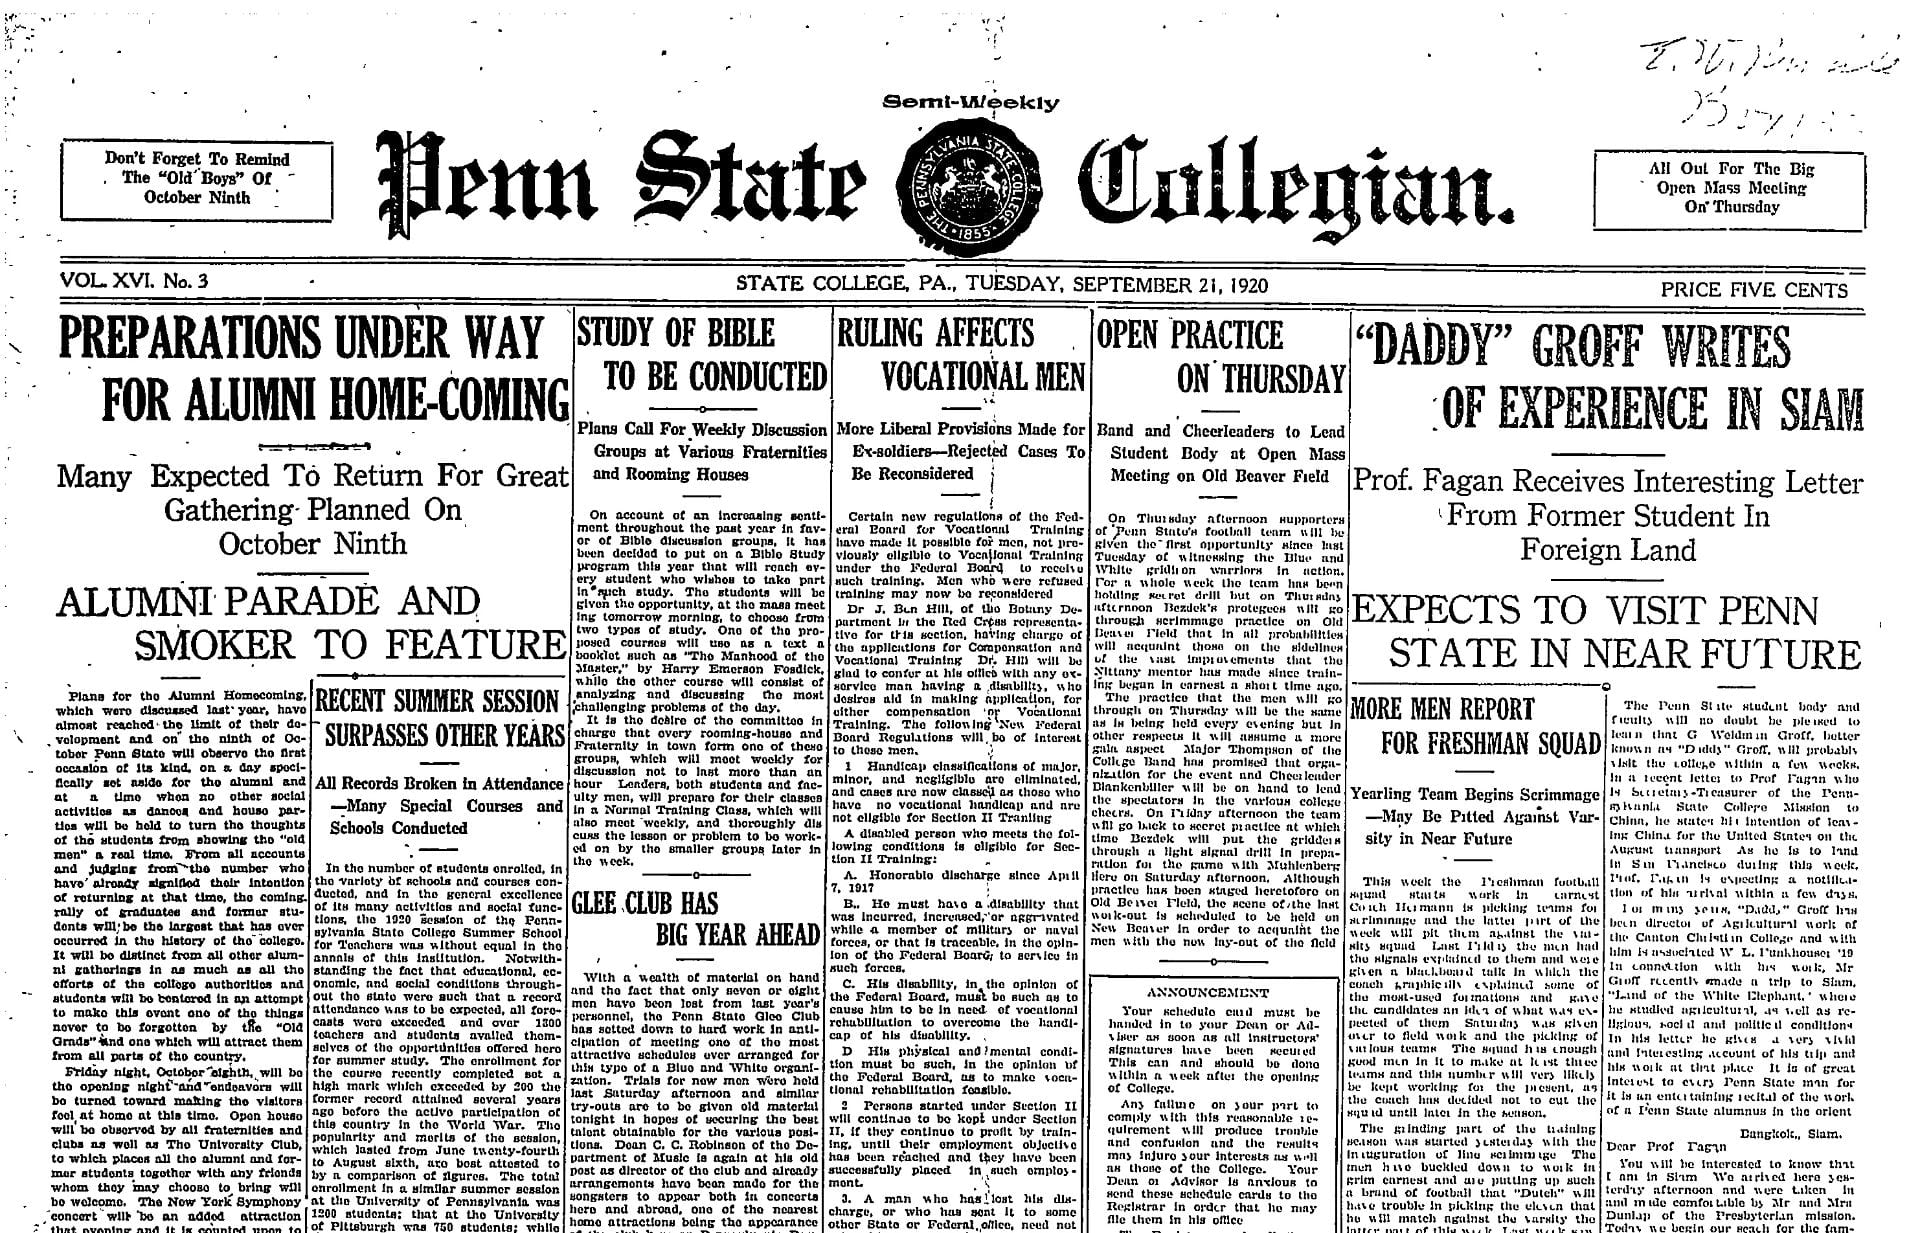 Front page Penn State Collegian, September 21, 1920